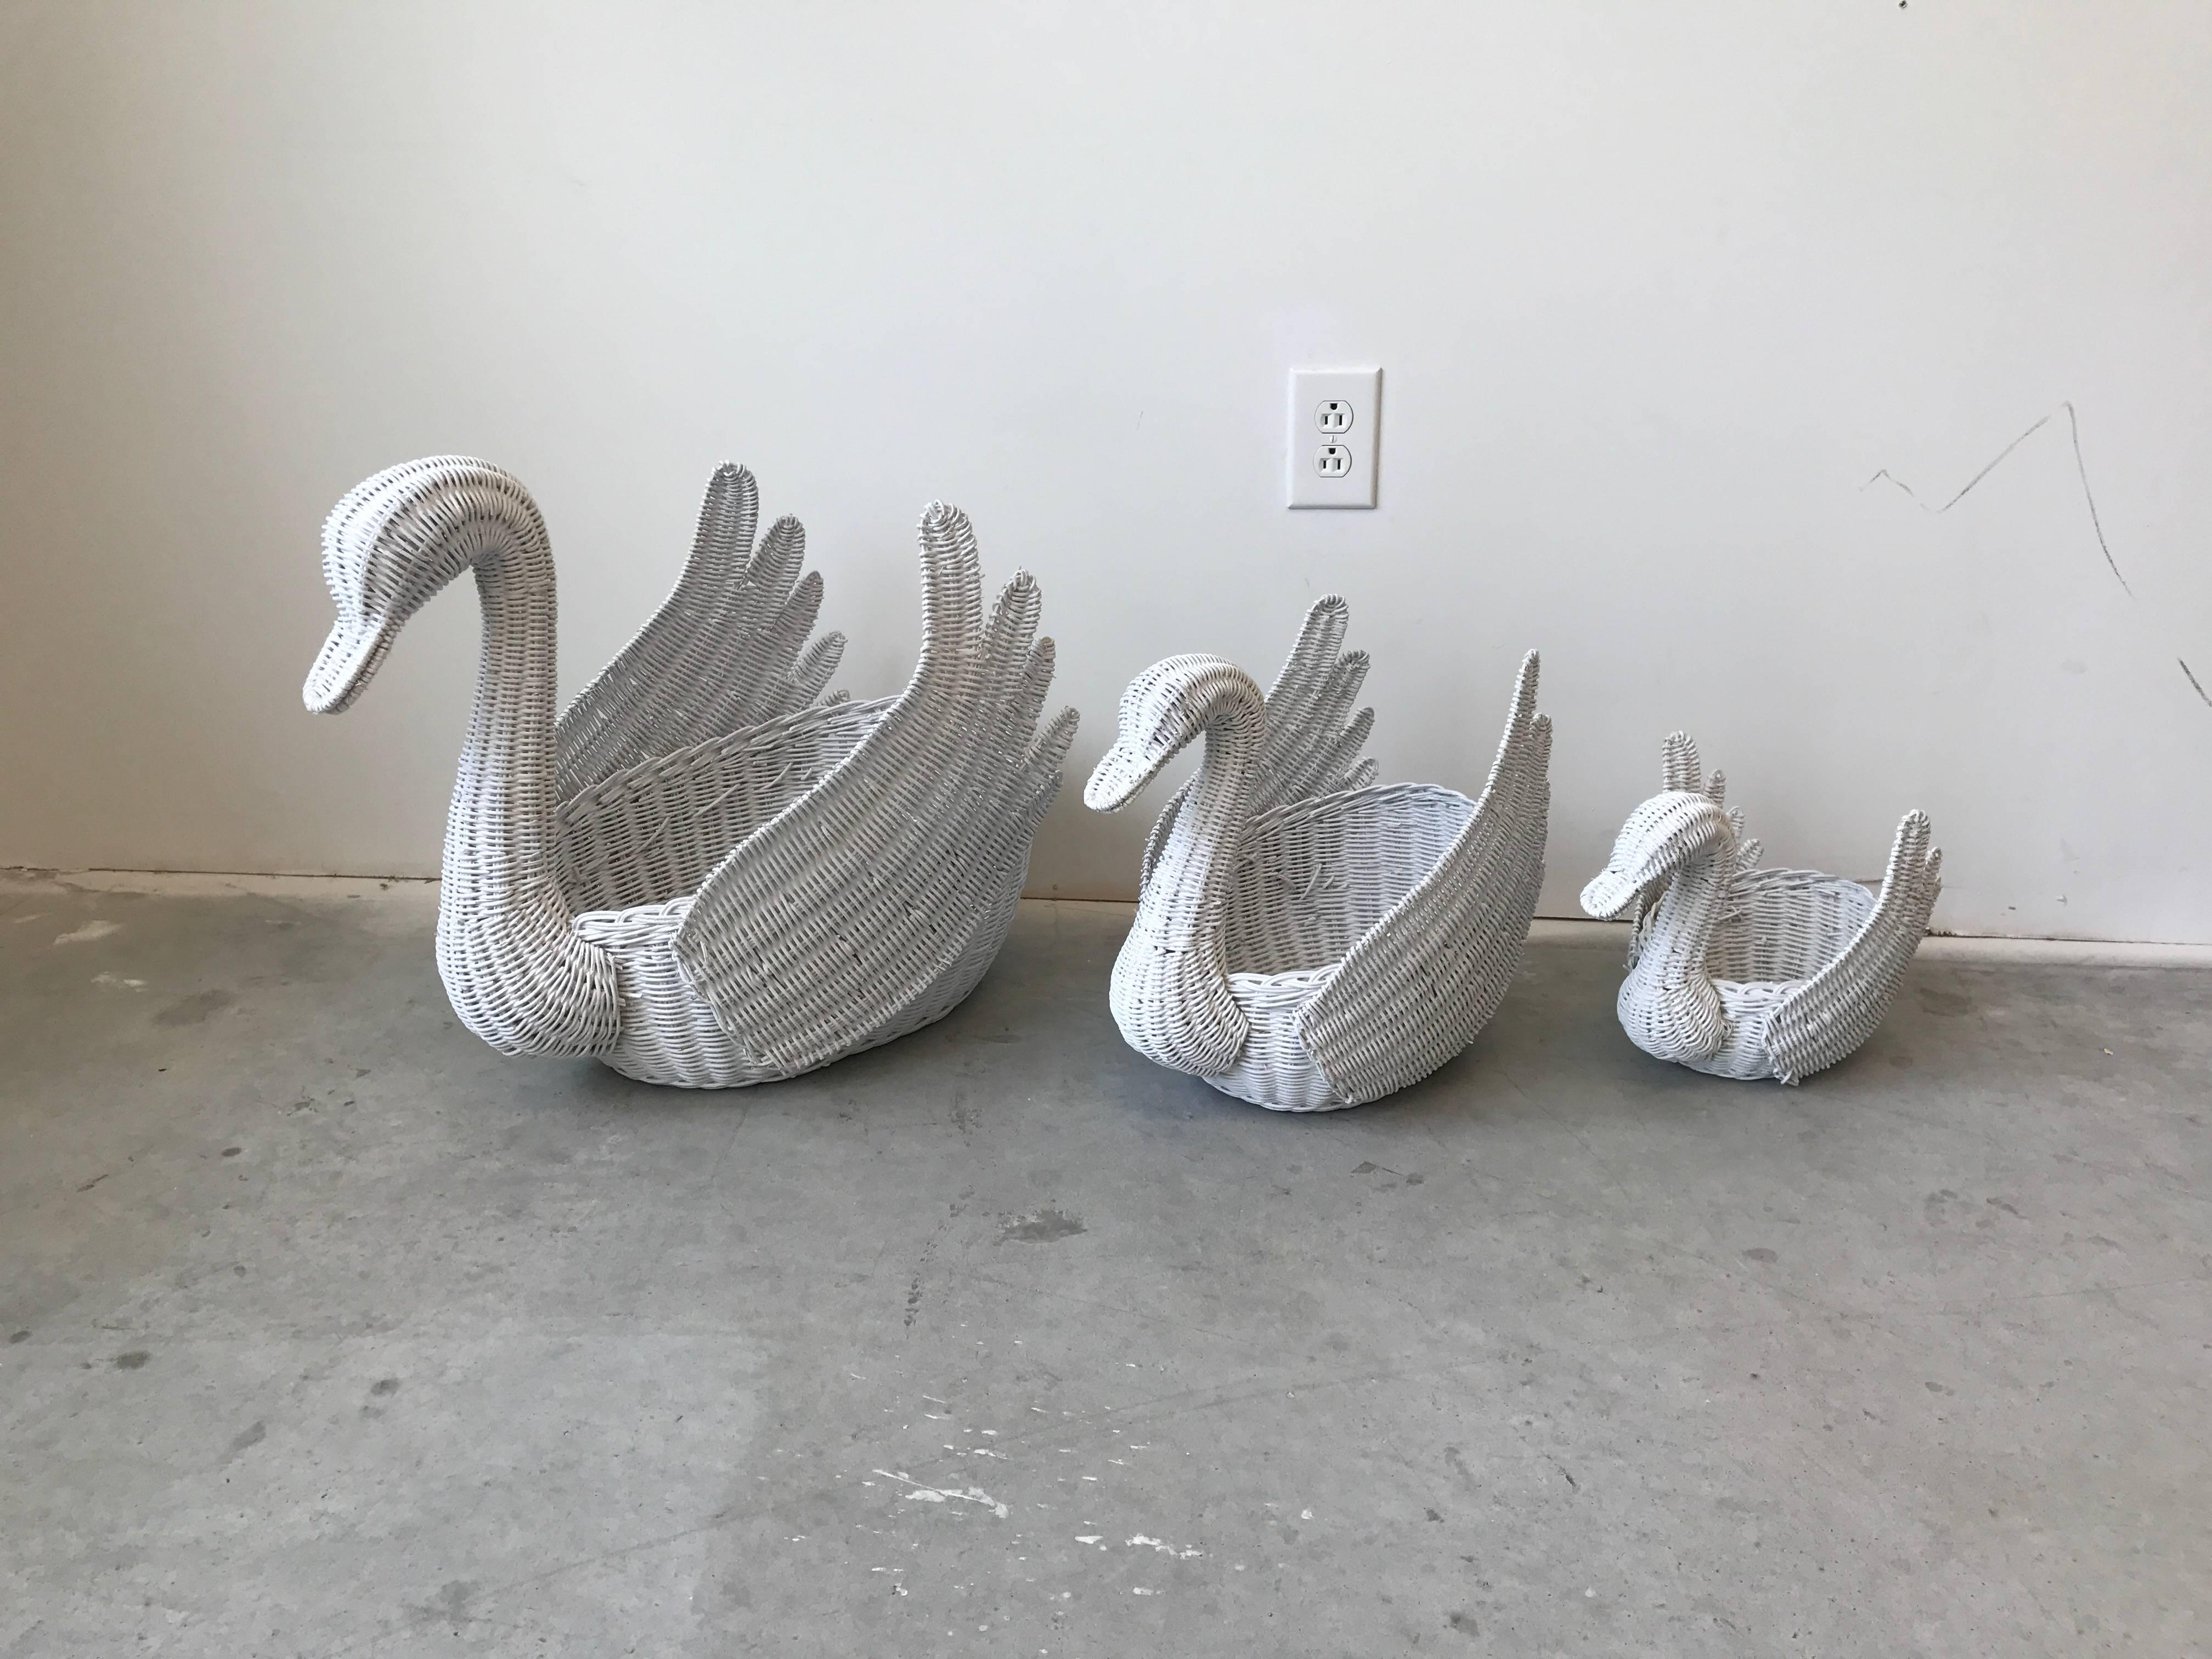 Offered is a gorgeous, 1970s Hollywood Regency white wicker cachepot baskets in the shape of swans. The larger one is great as a magazine basket! 

Measures: Large 23.5